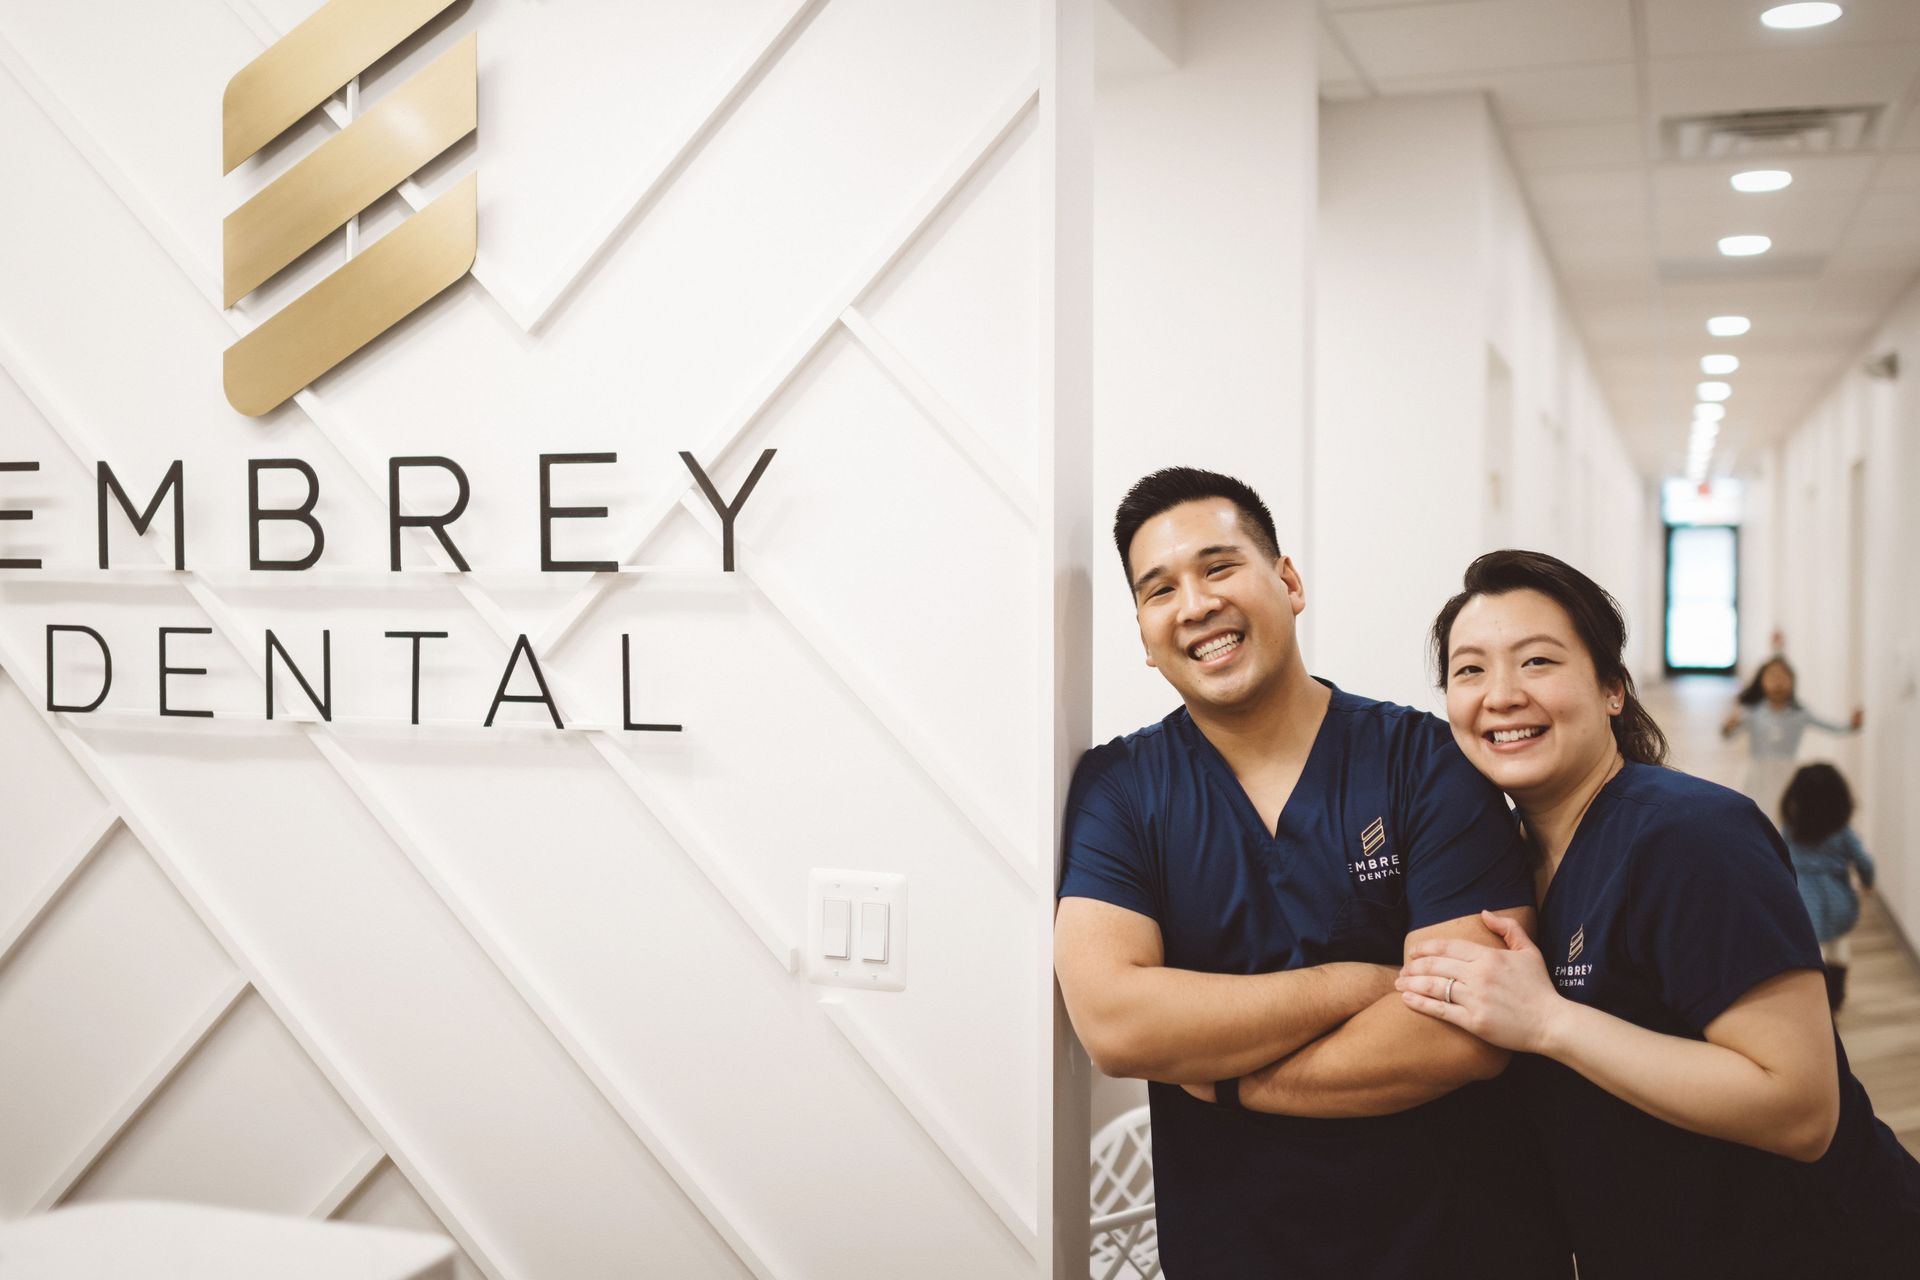 dr. lim standing in embrey dental office smiling and happy with kids running in the background at Family dentistry